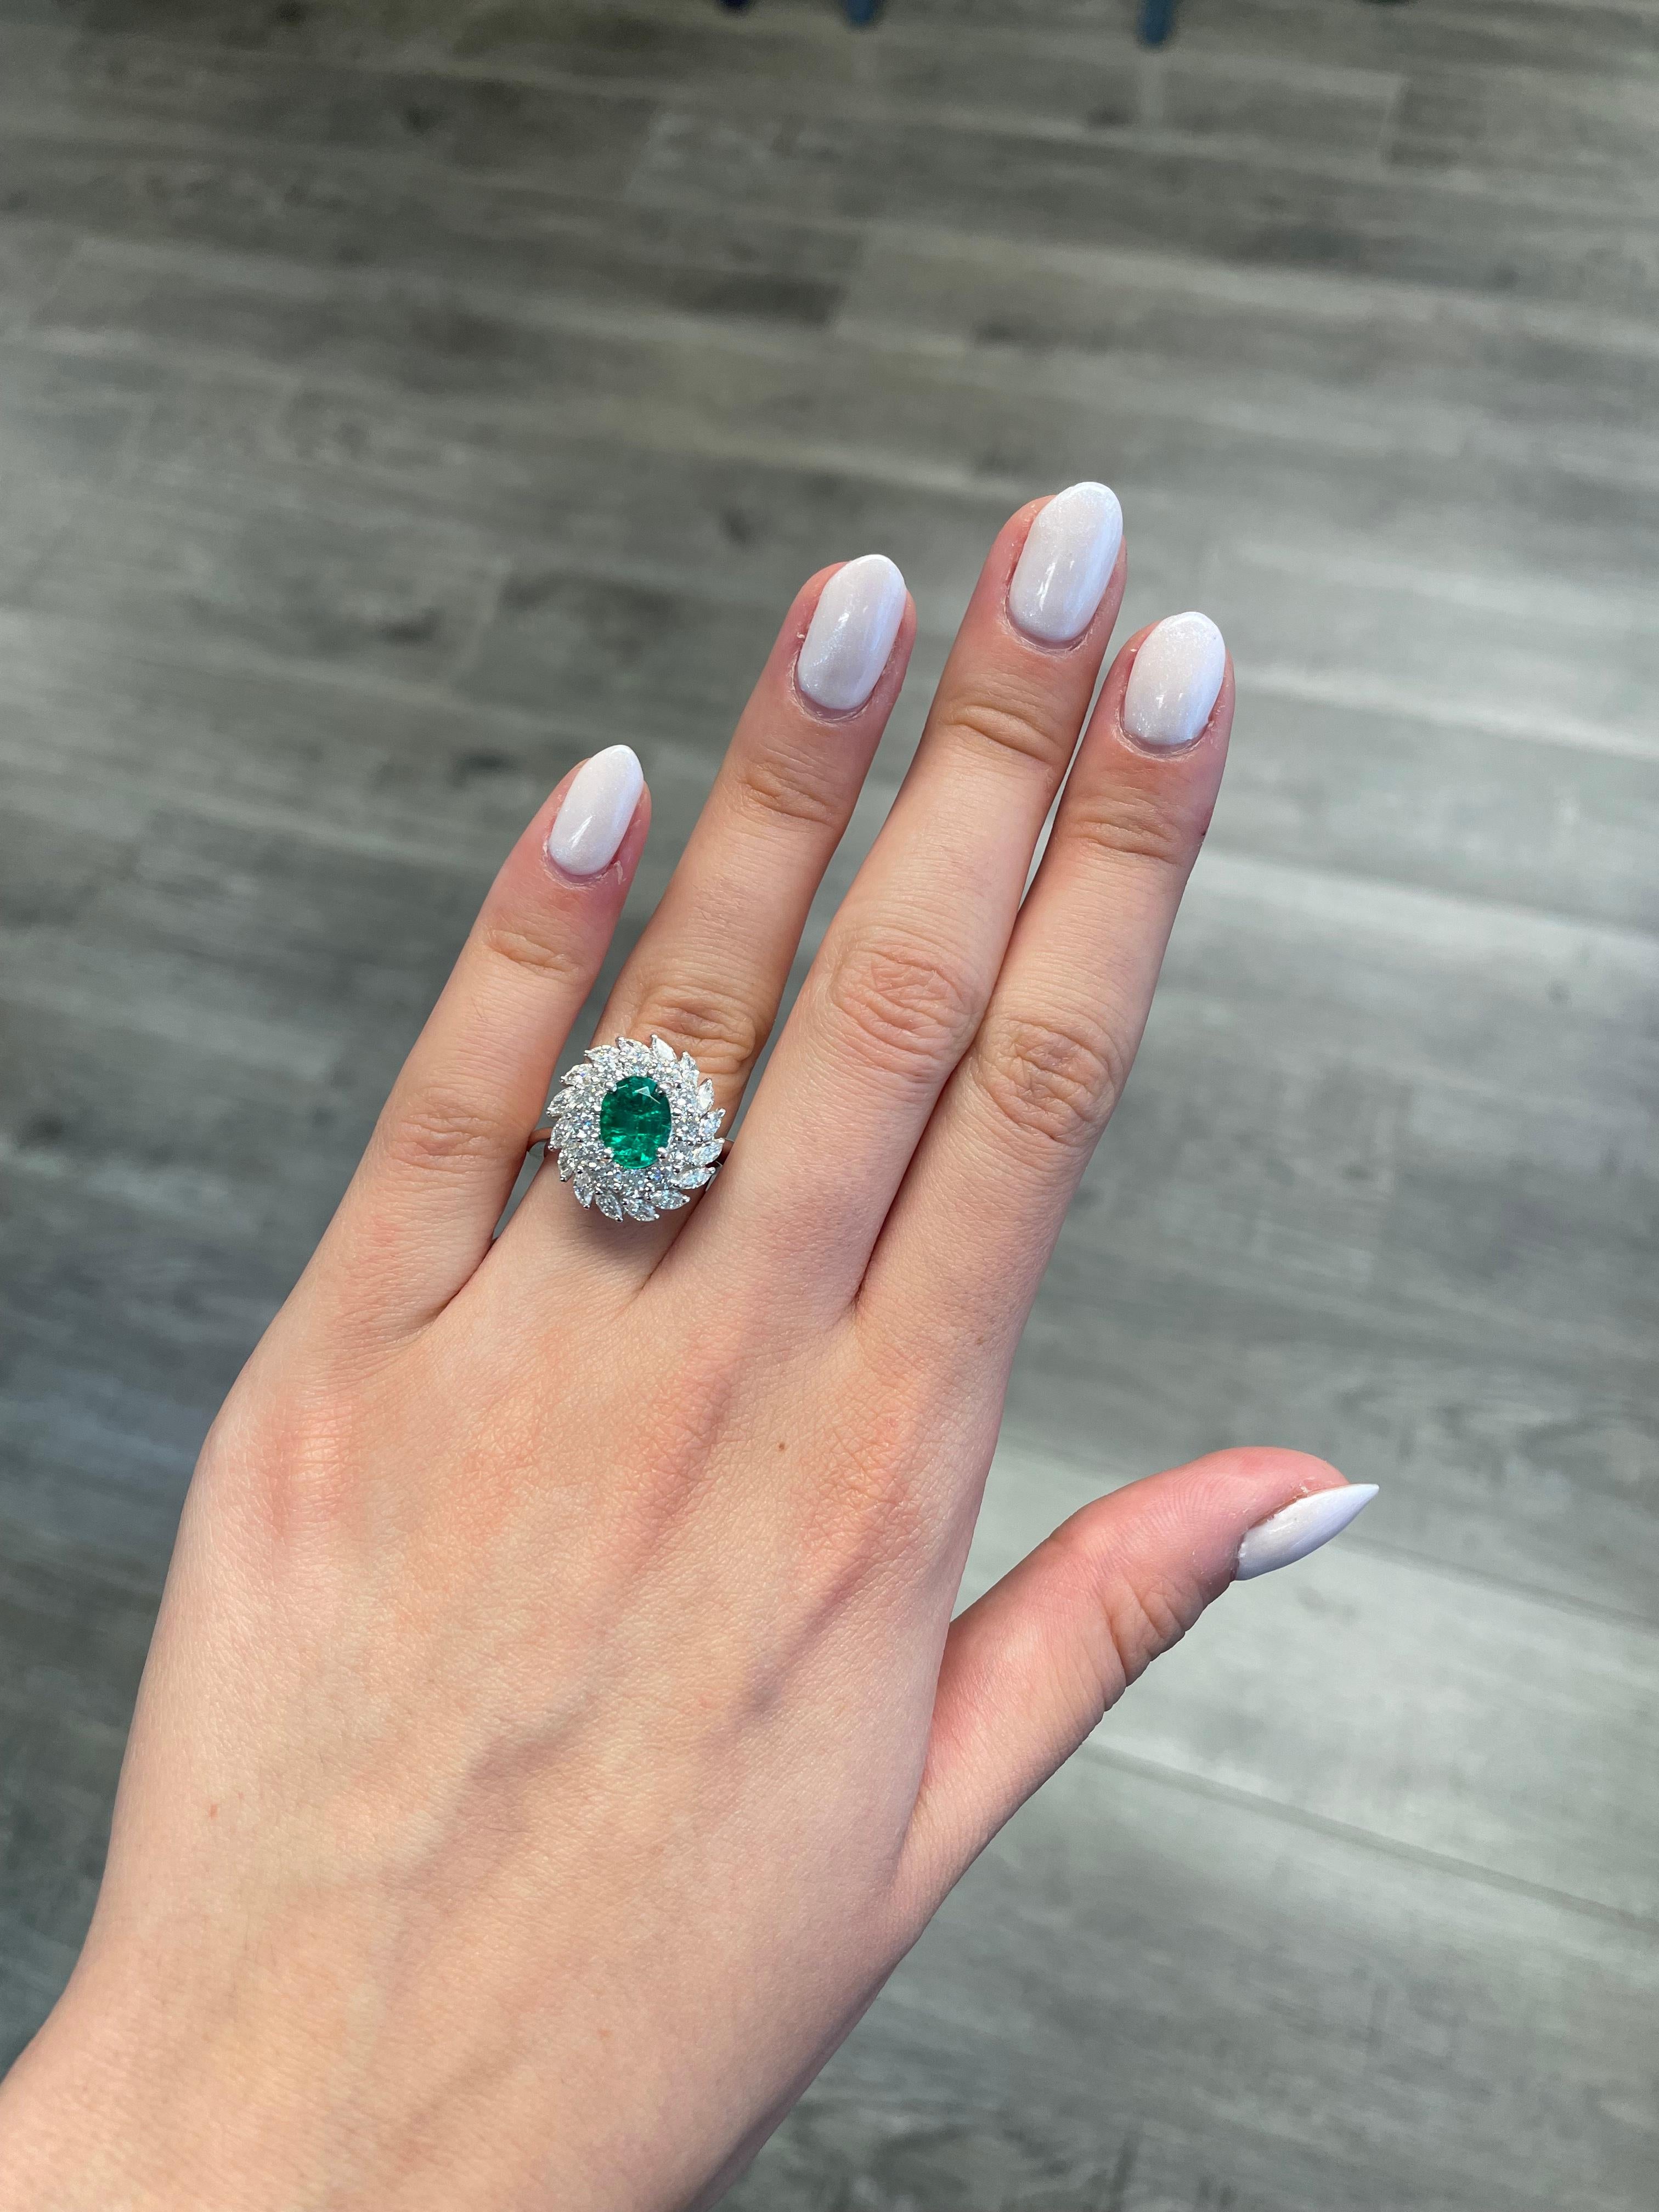 Lovely emerald with diamond double halo ring. By Alexander Beverly Hills.
1.30 carat oval emerald apx F2 complemented with round and marquise brilliant diamonds, 1.48ct. Approximately H/I color and SI clarity. 2.78ct total gemstone weight, in 18k